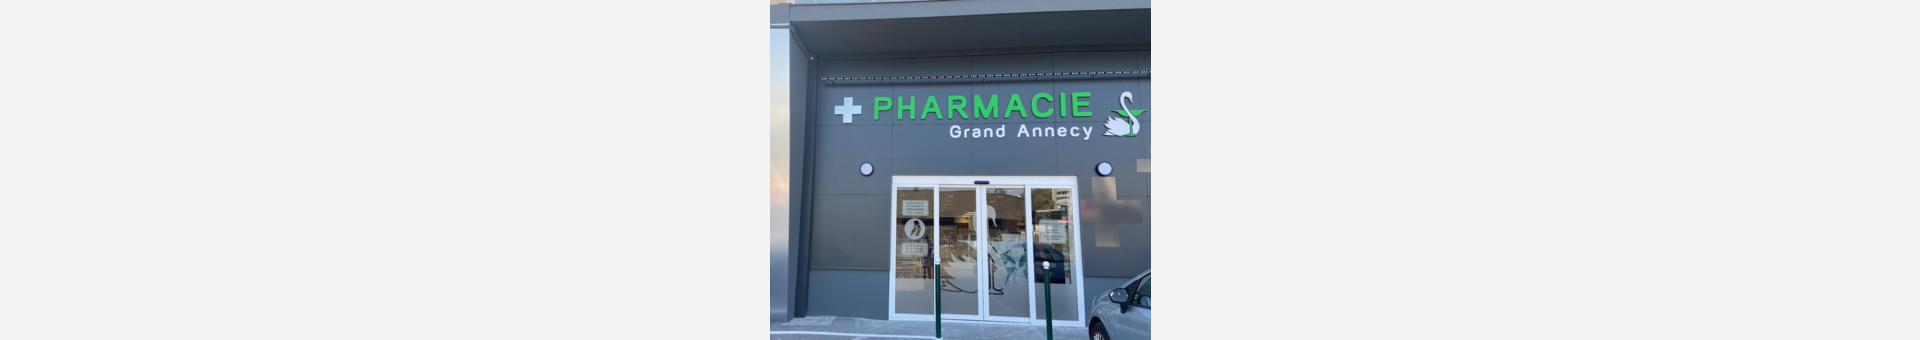 Pharmacie Grand Annecy,Annecy